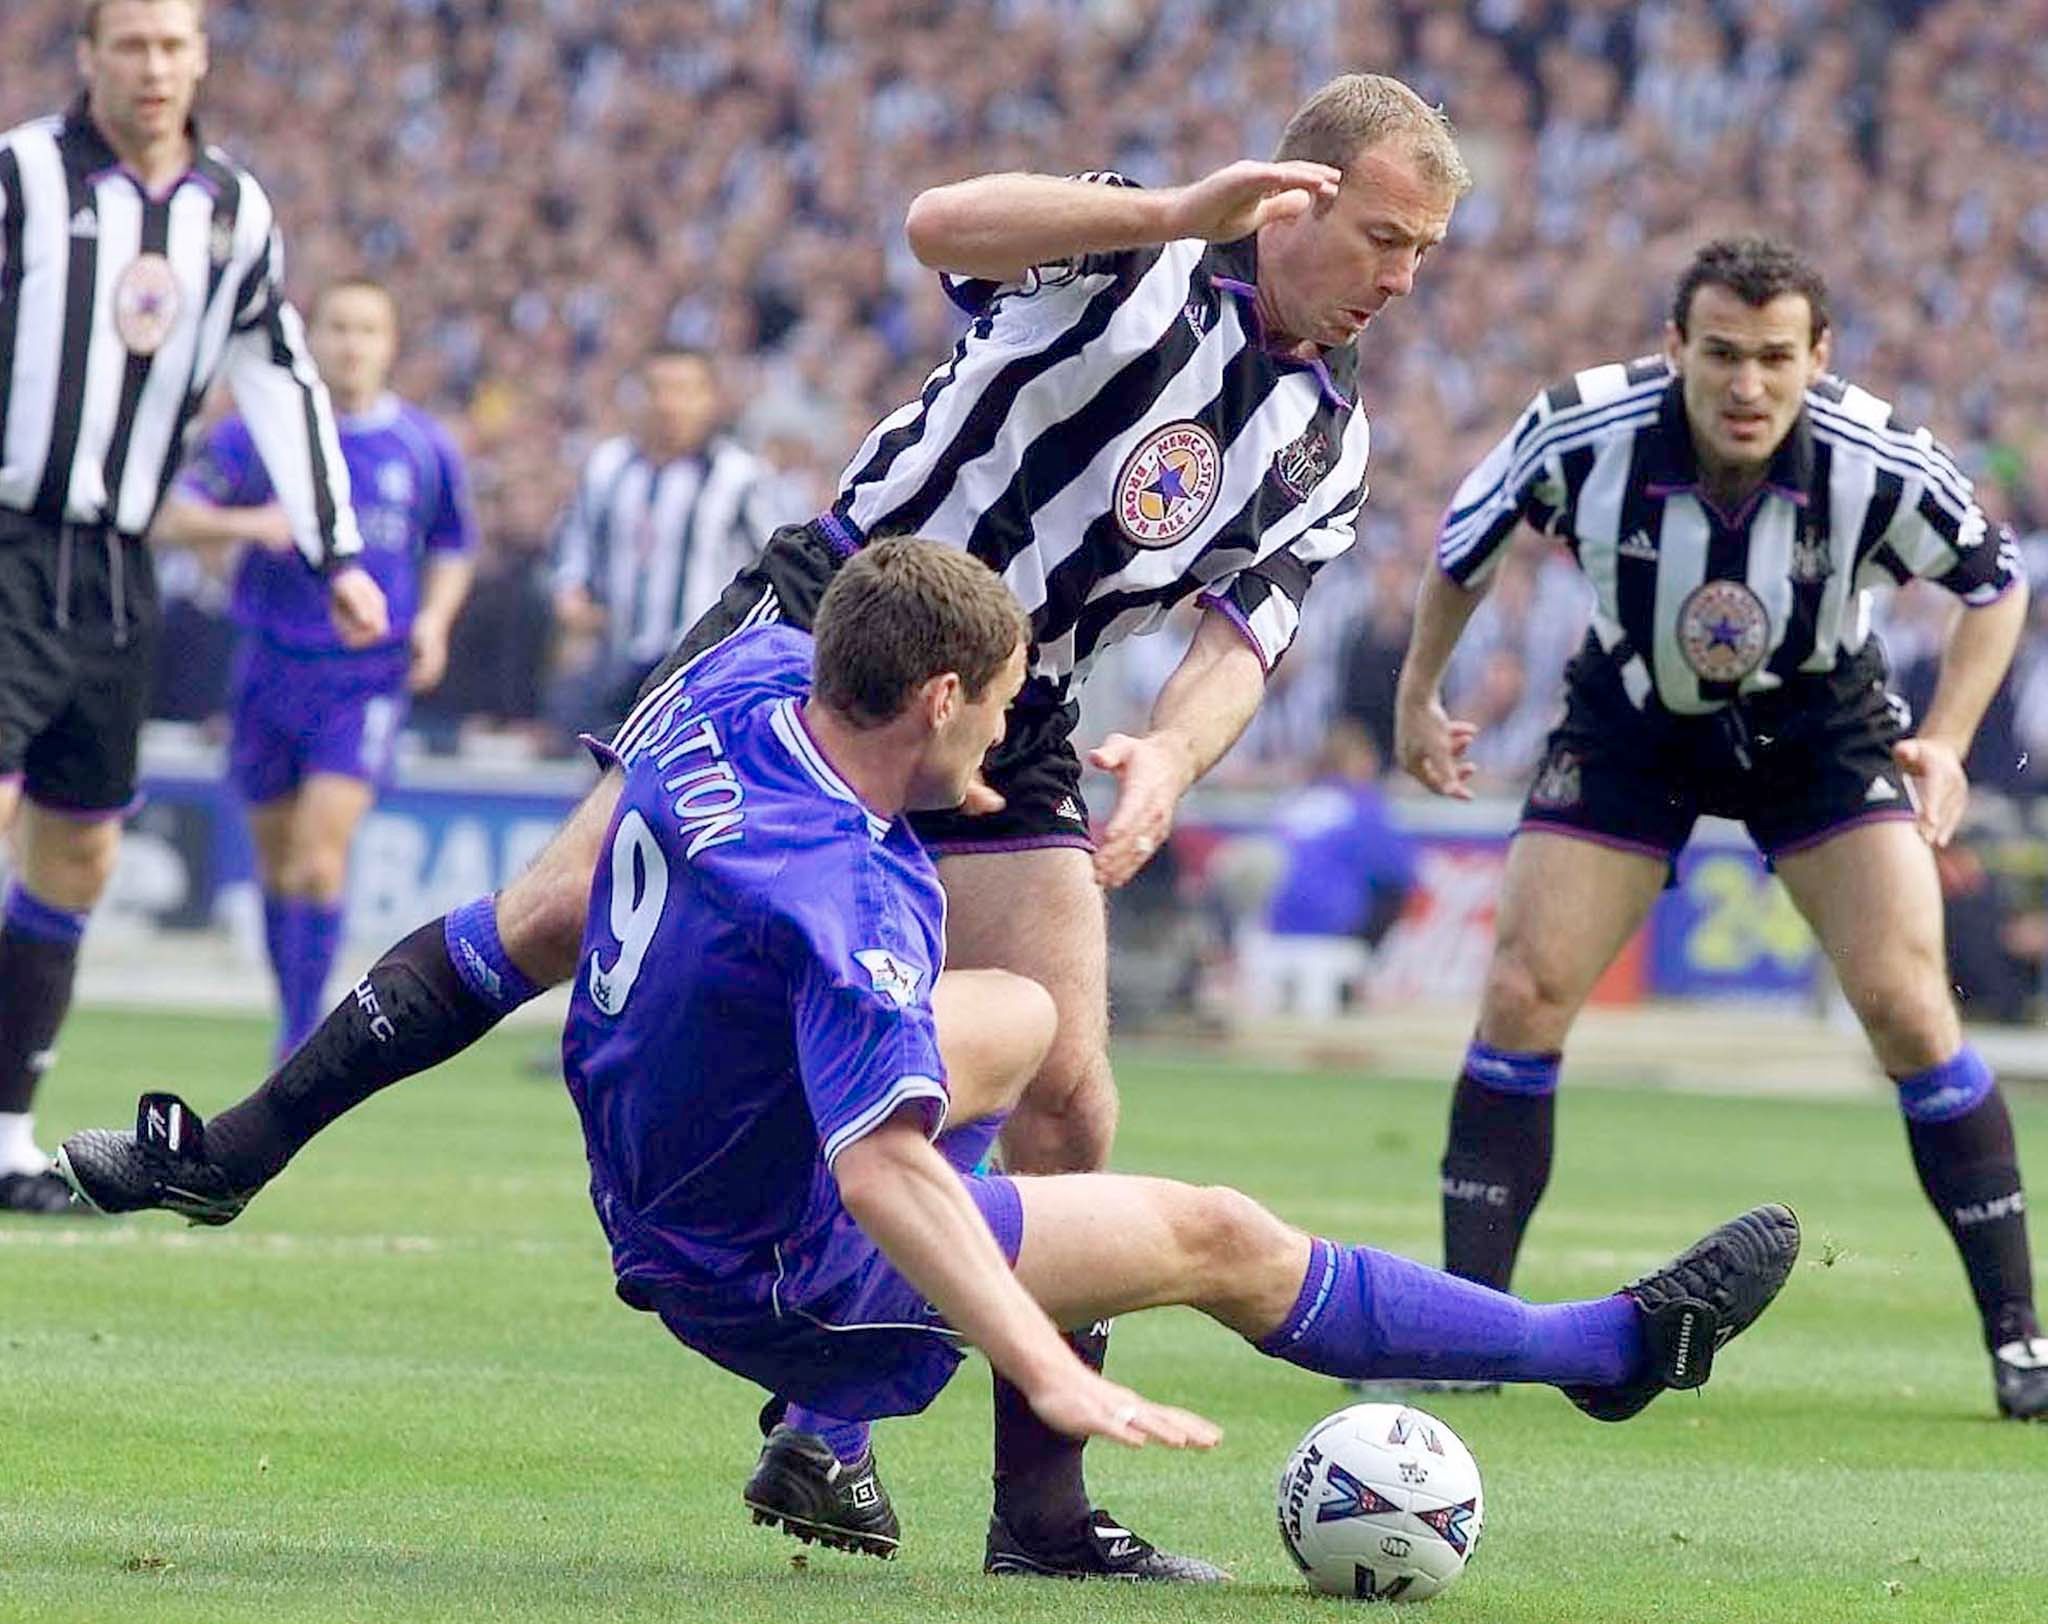 Chelsea's Chris Sutton (L) tackles Newcastle United's Alan Shearer at Wembley, April 9. Chelsea are playing Newcastle in the semi-final of the F.A. cup.

AS